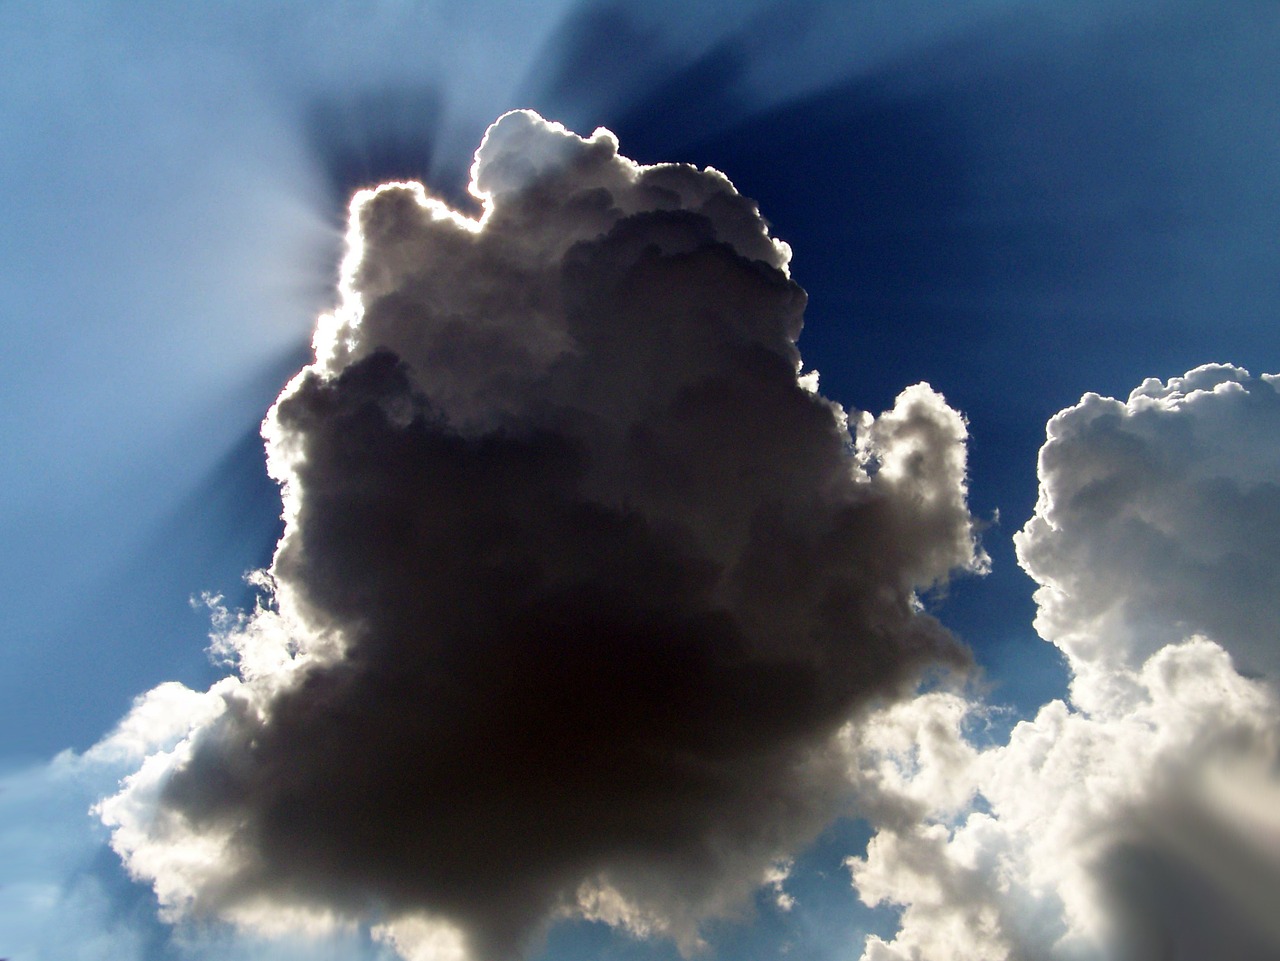 Every cloud has a silver lining, so they say *Pixabay image